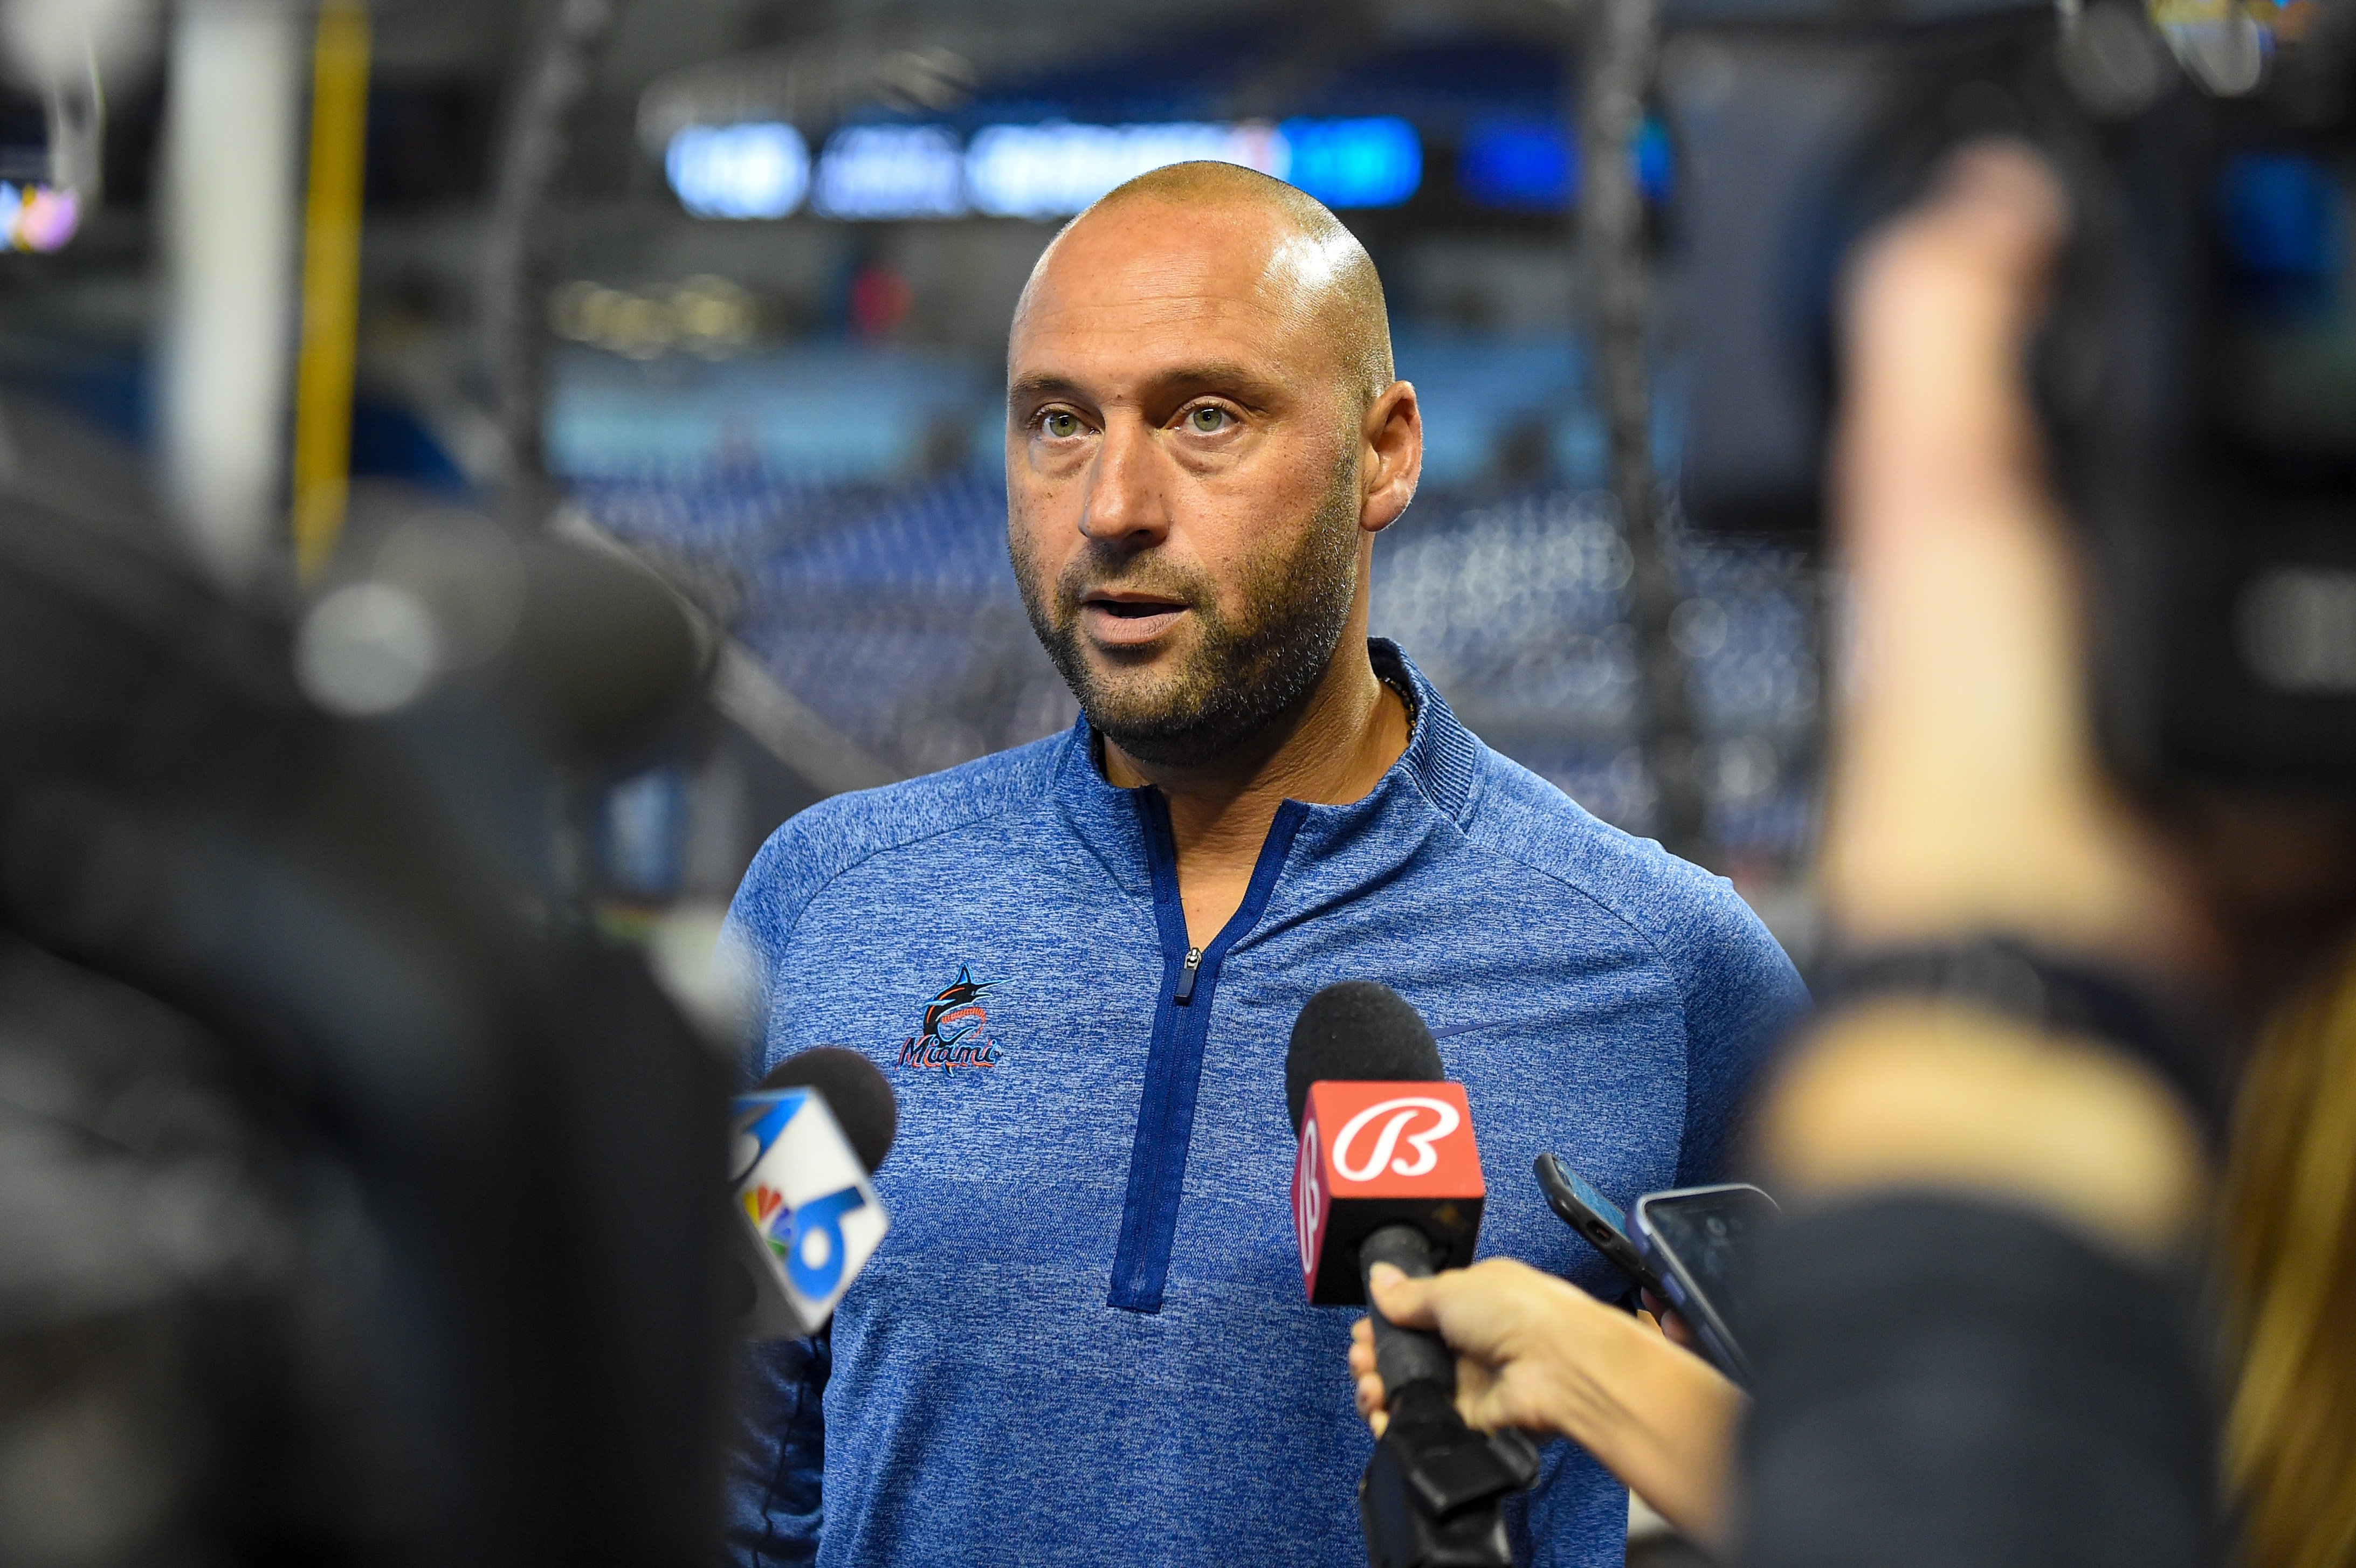 Miami Marlins CEO Derek Jeter speaks to the media before the start of the game against the Philadelphia Phillies